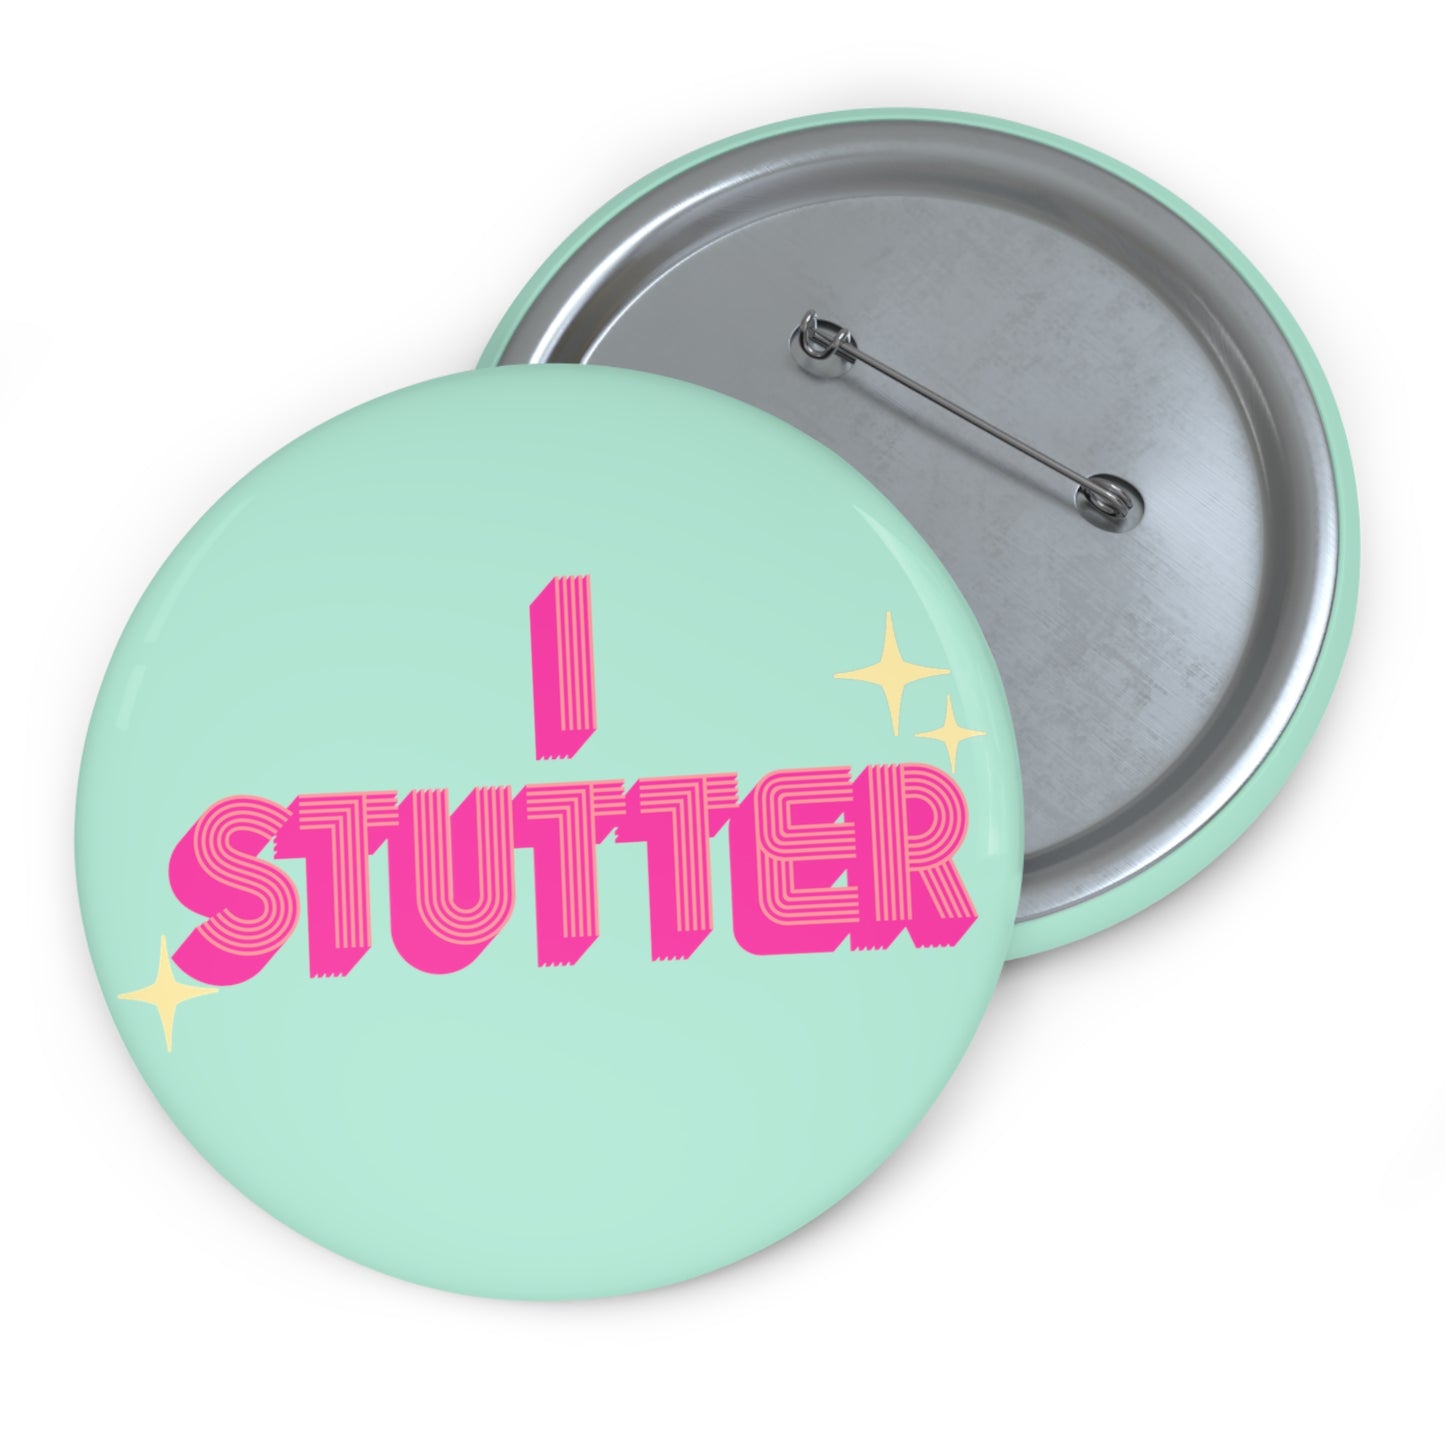 I Stutter Retro Mint Pink Pin Button, 1.25" 2.25" or 3"